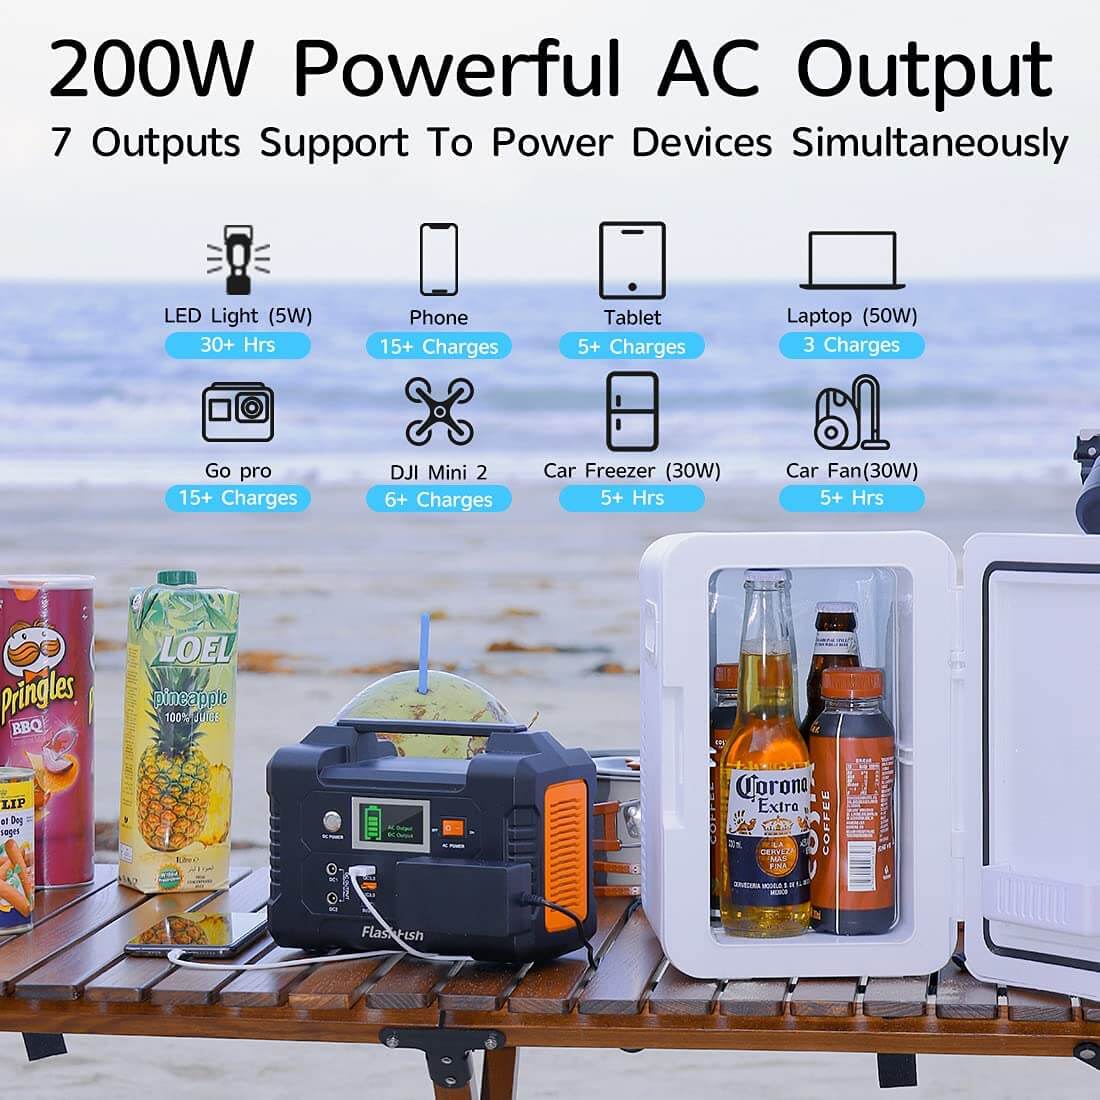 Durable and reliable portable power station for outdoor adventures and emergency backup